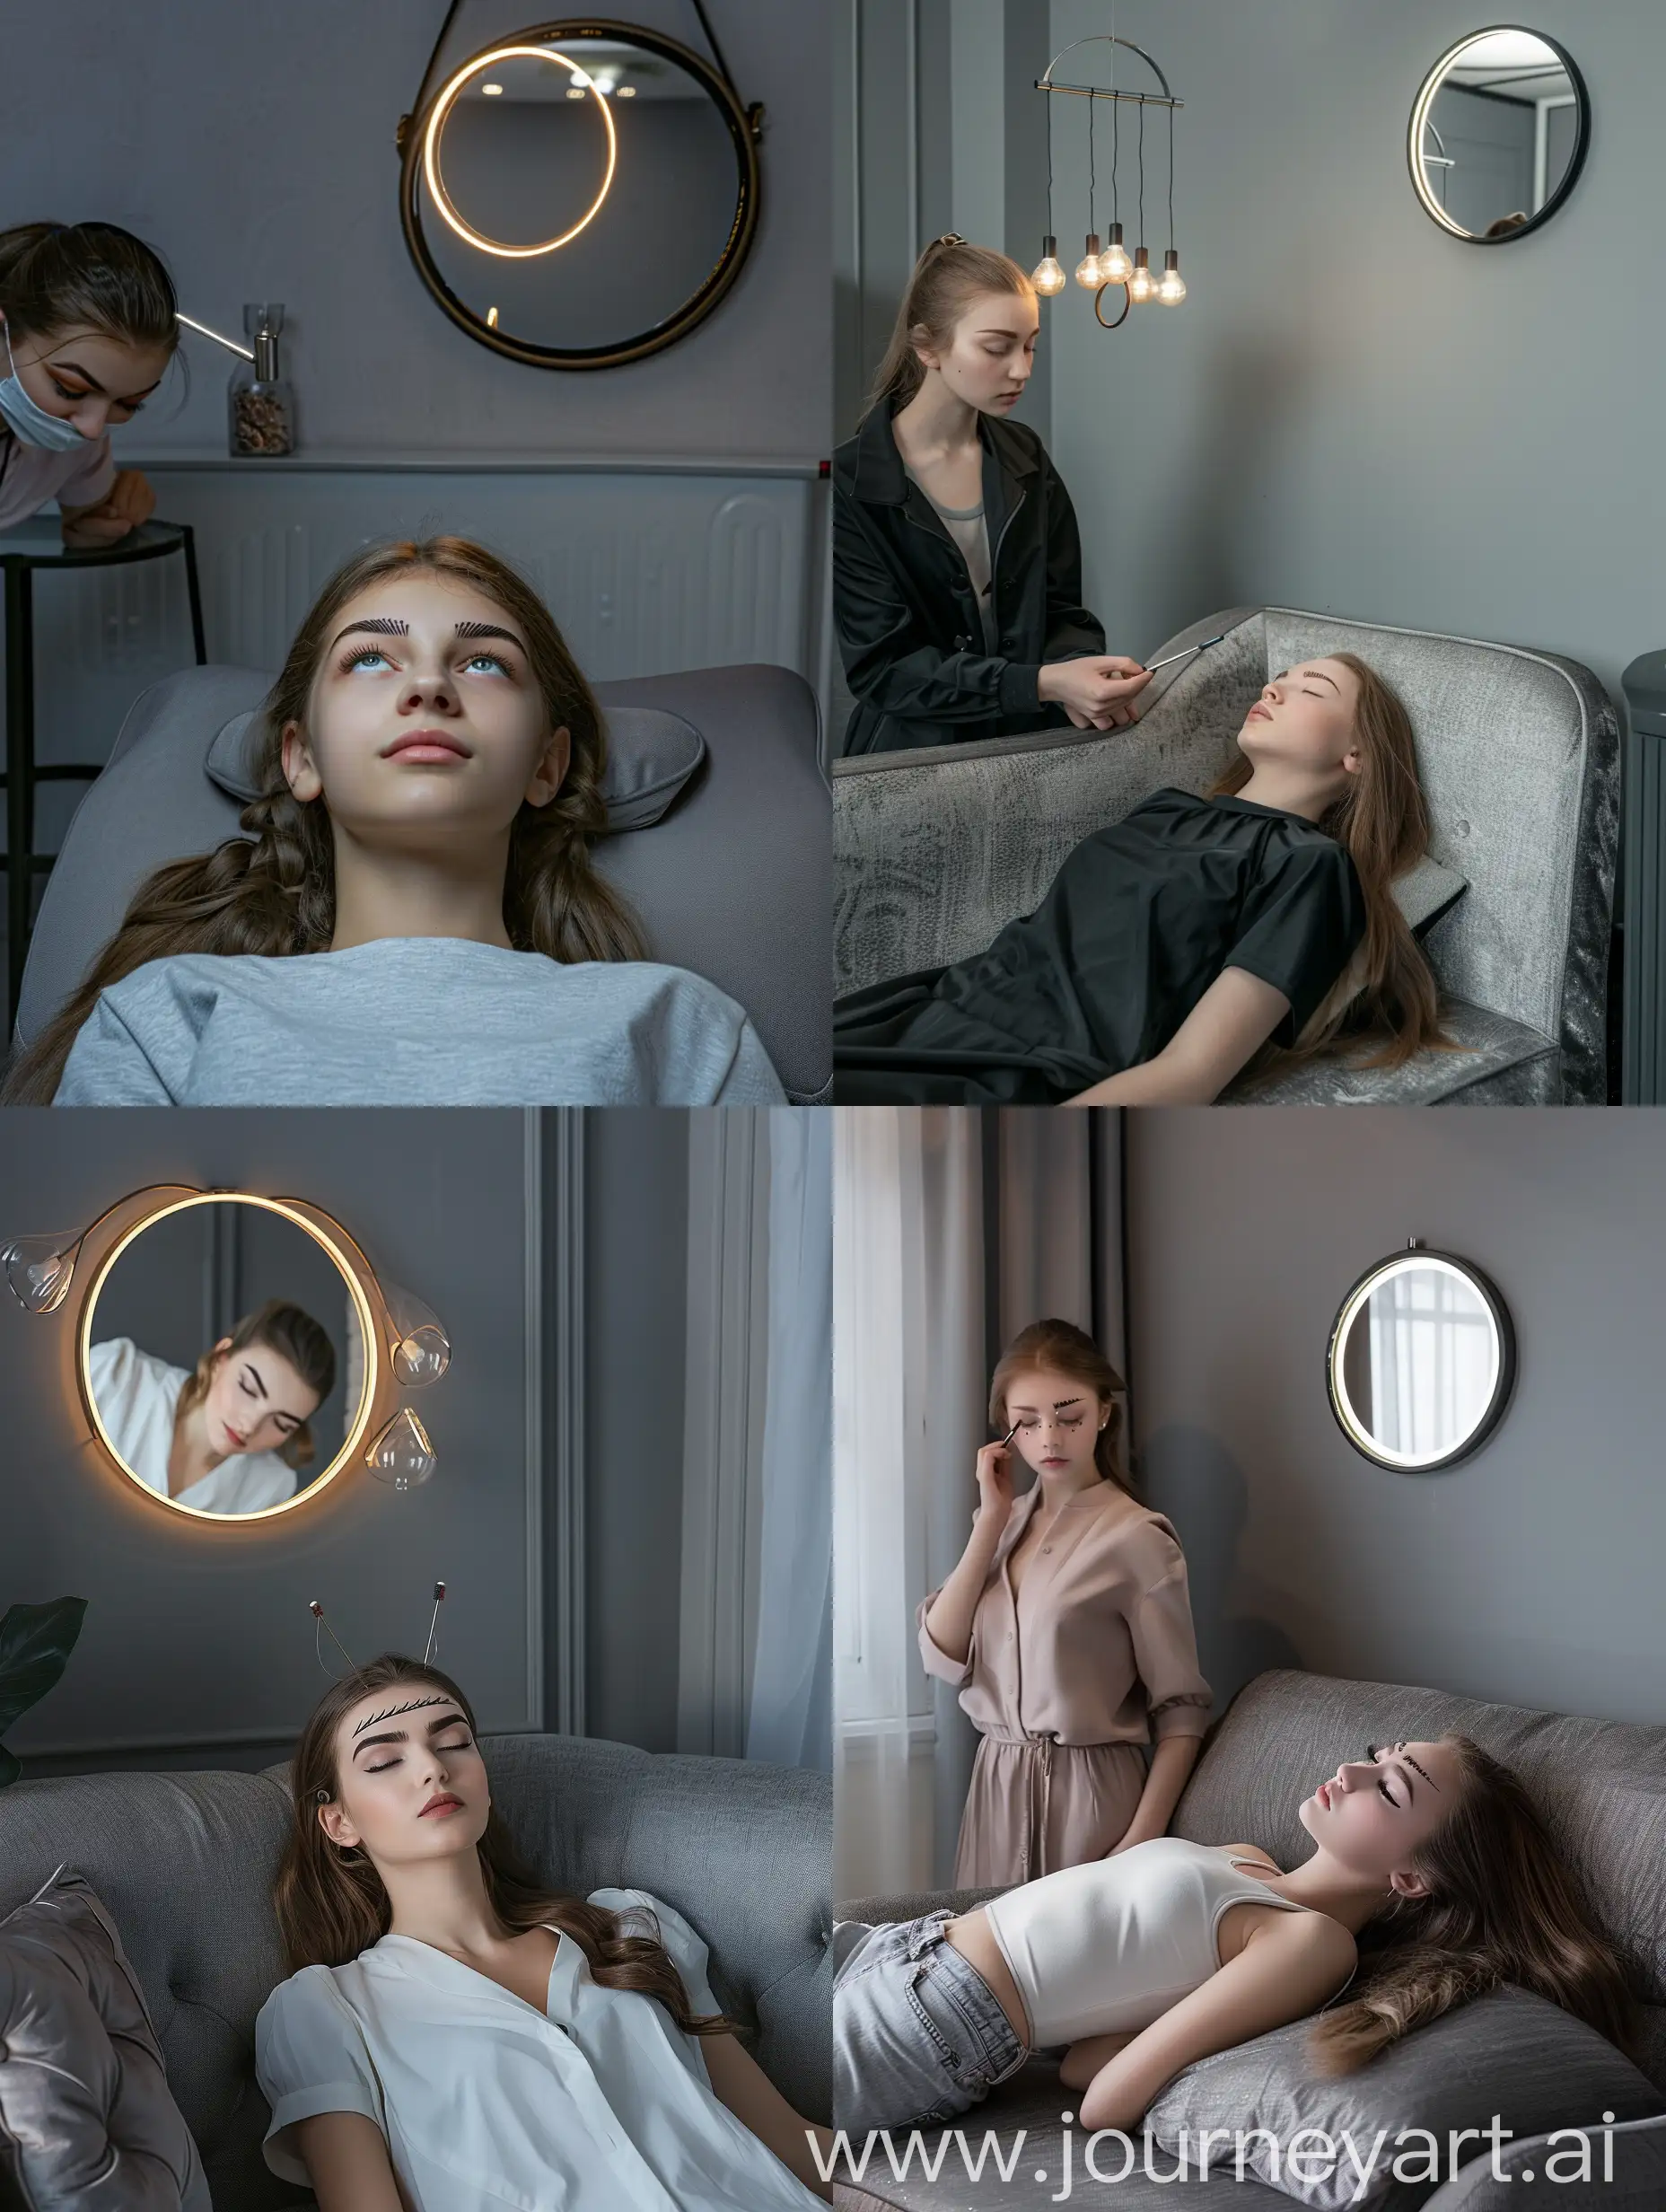 Master-Brow-Artist-Performing-Eyebrow-Lamination-on-Young-Woman-in-Stylish-Gray-Room